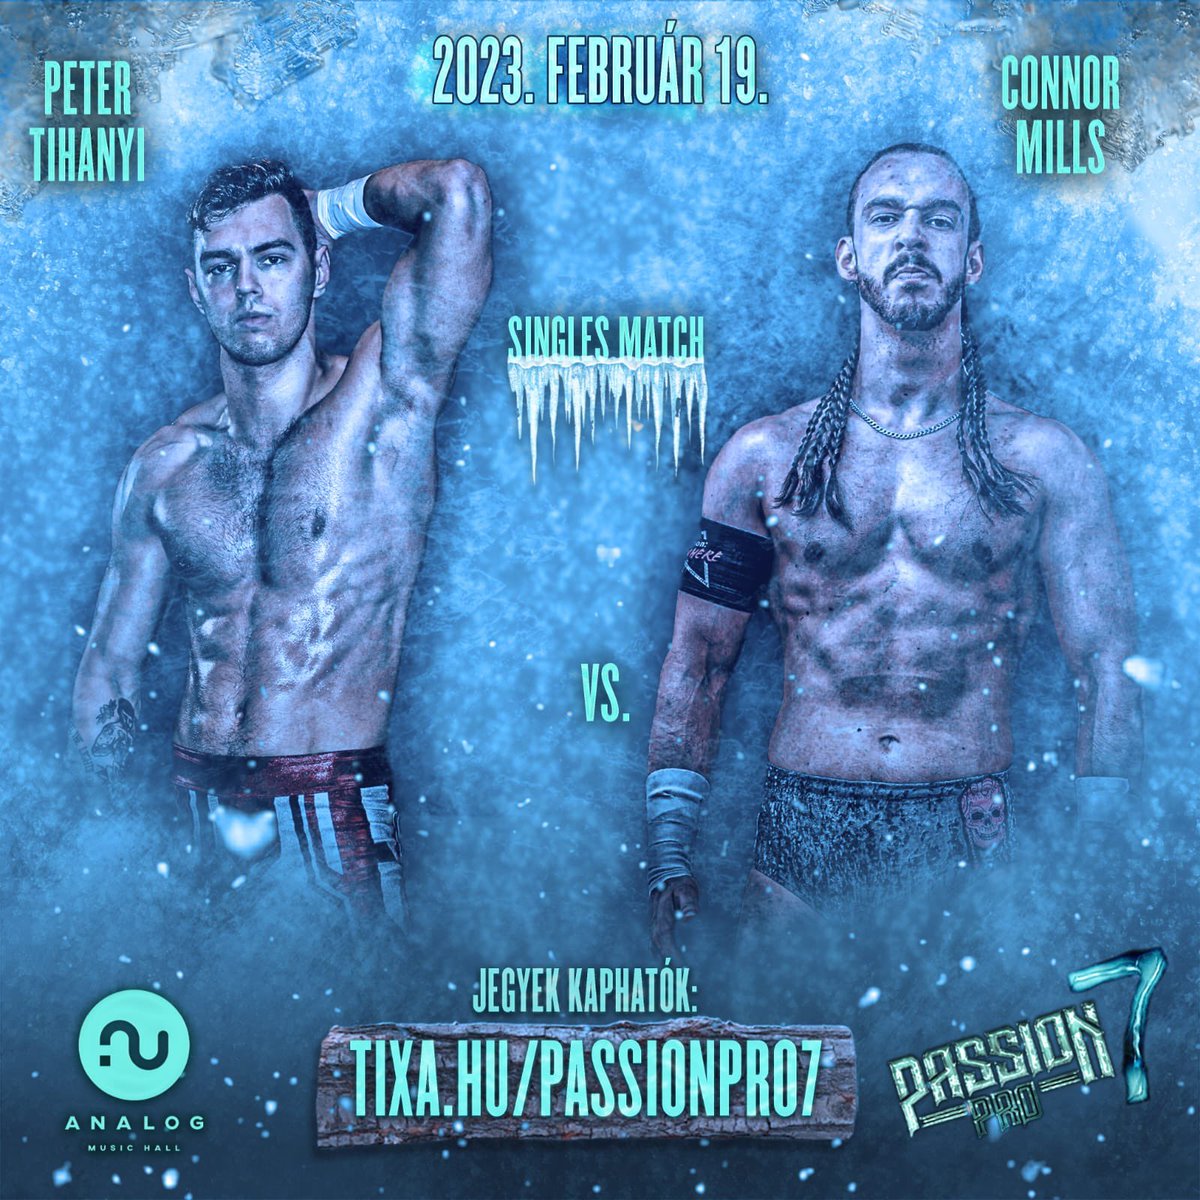 Ice cold one on one!

@petertihanyi1 and #ConnorMills will tear the house down with their energy on #PassionPro7!

tixa.hu/passionpro7